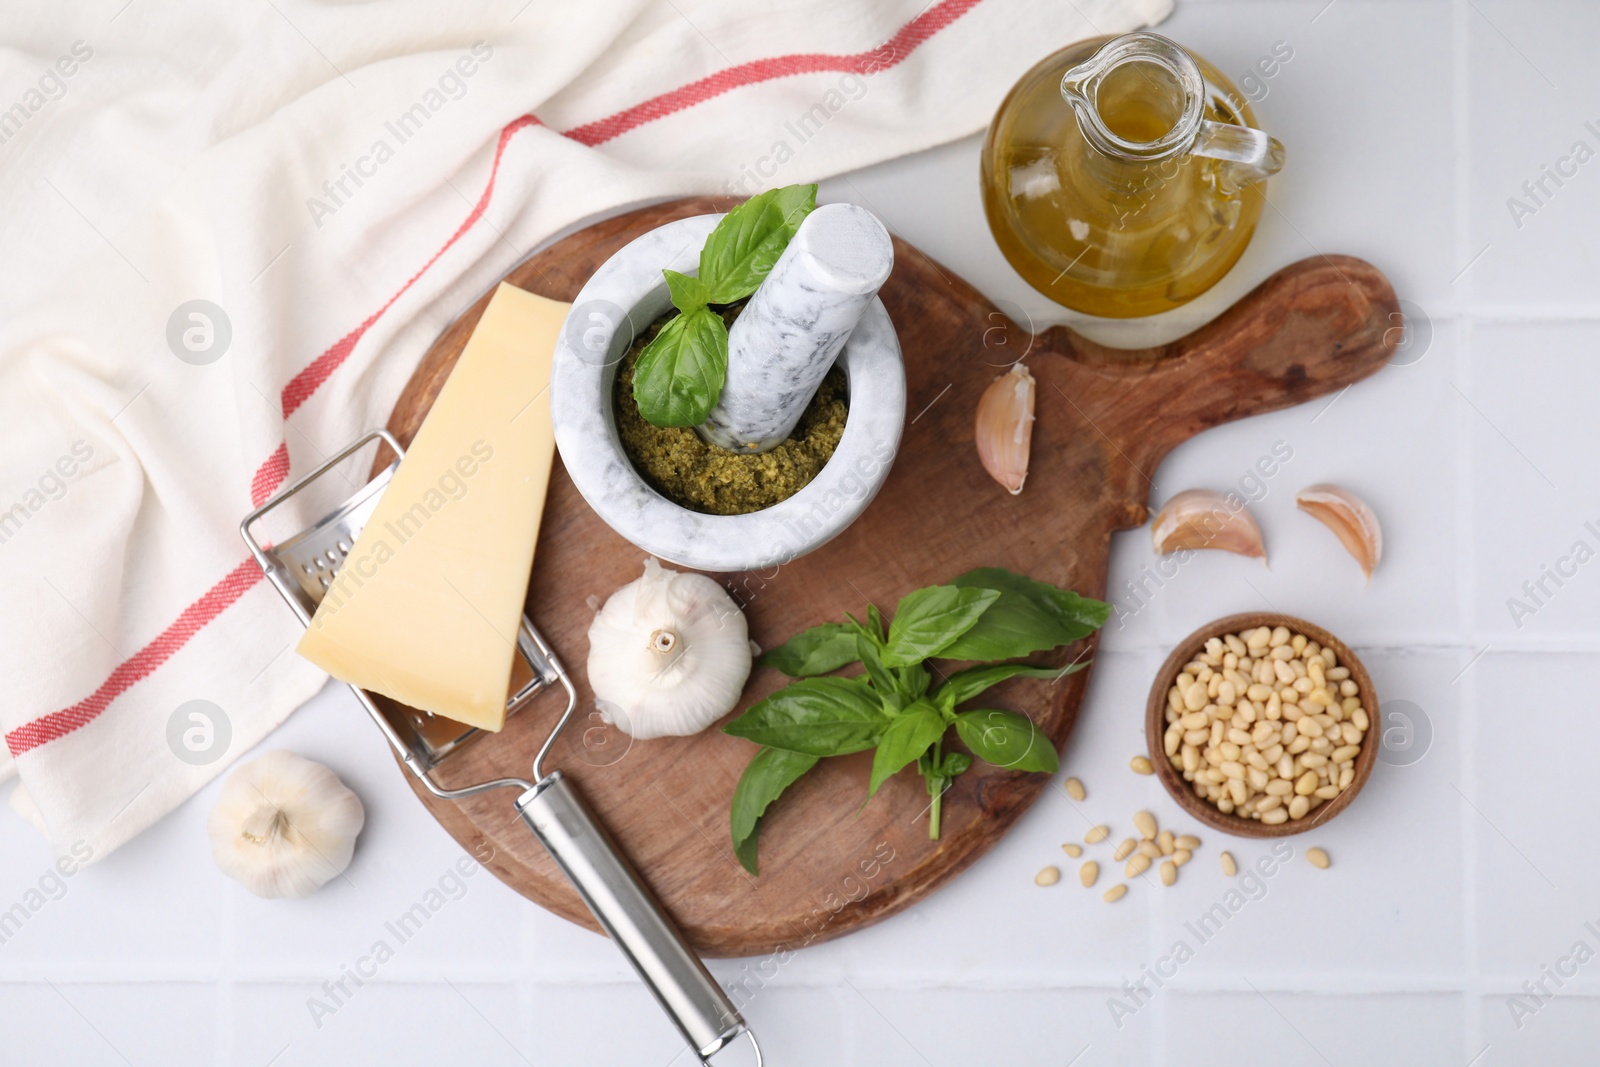 Photo of Different ingredients for cooking tasty pesto sauce on white tiled table, flat lay